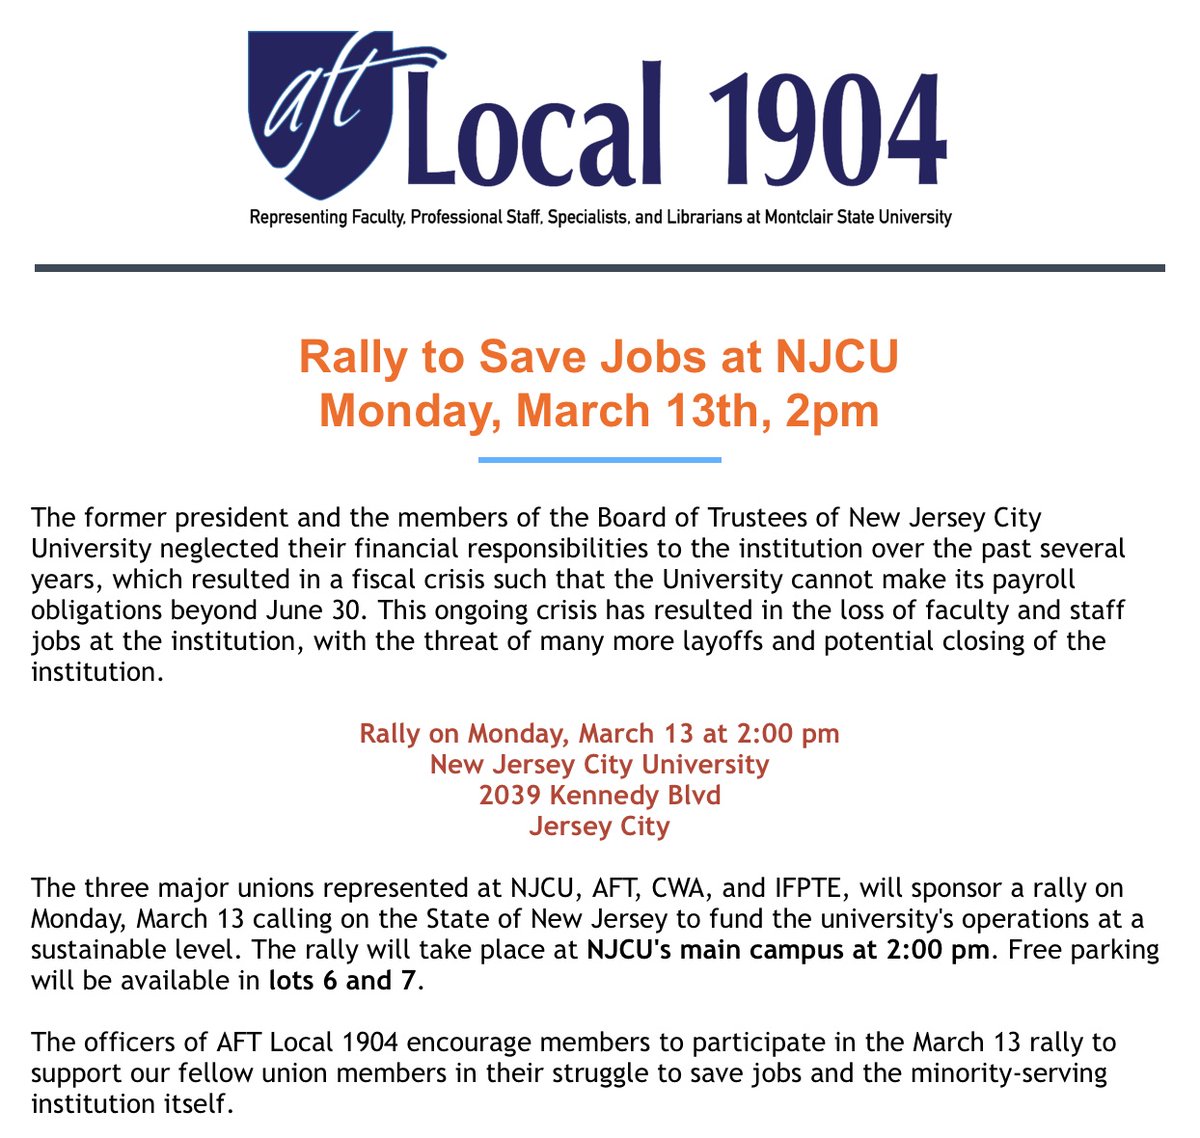 I'm 1,000 miles away right now, but if I were home I'd be at this rally on Monday. The NJ state system of higher ed is collapsing, and too few people (even in the academic labor movement) seem to be aware of it. NJCU will probably close without a bailout. Too bad it's not SVB.